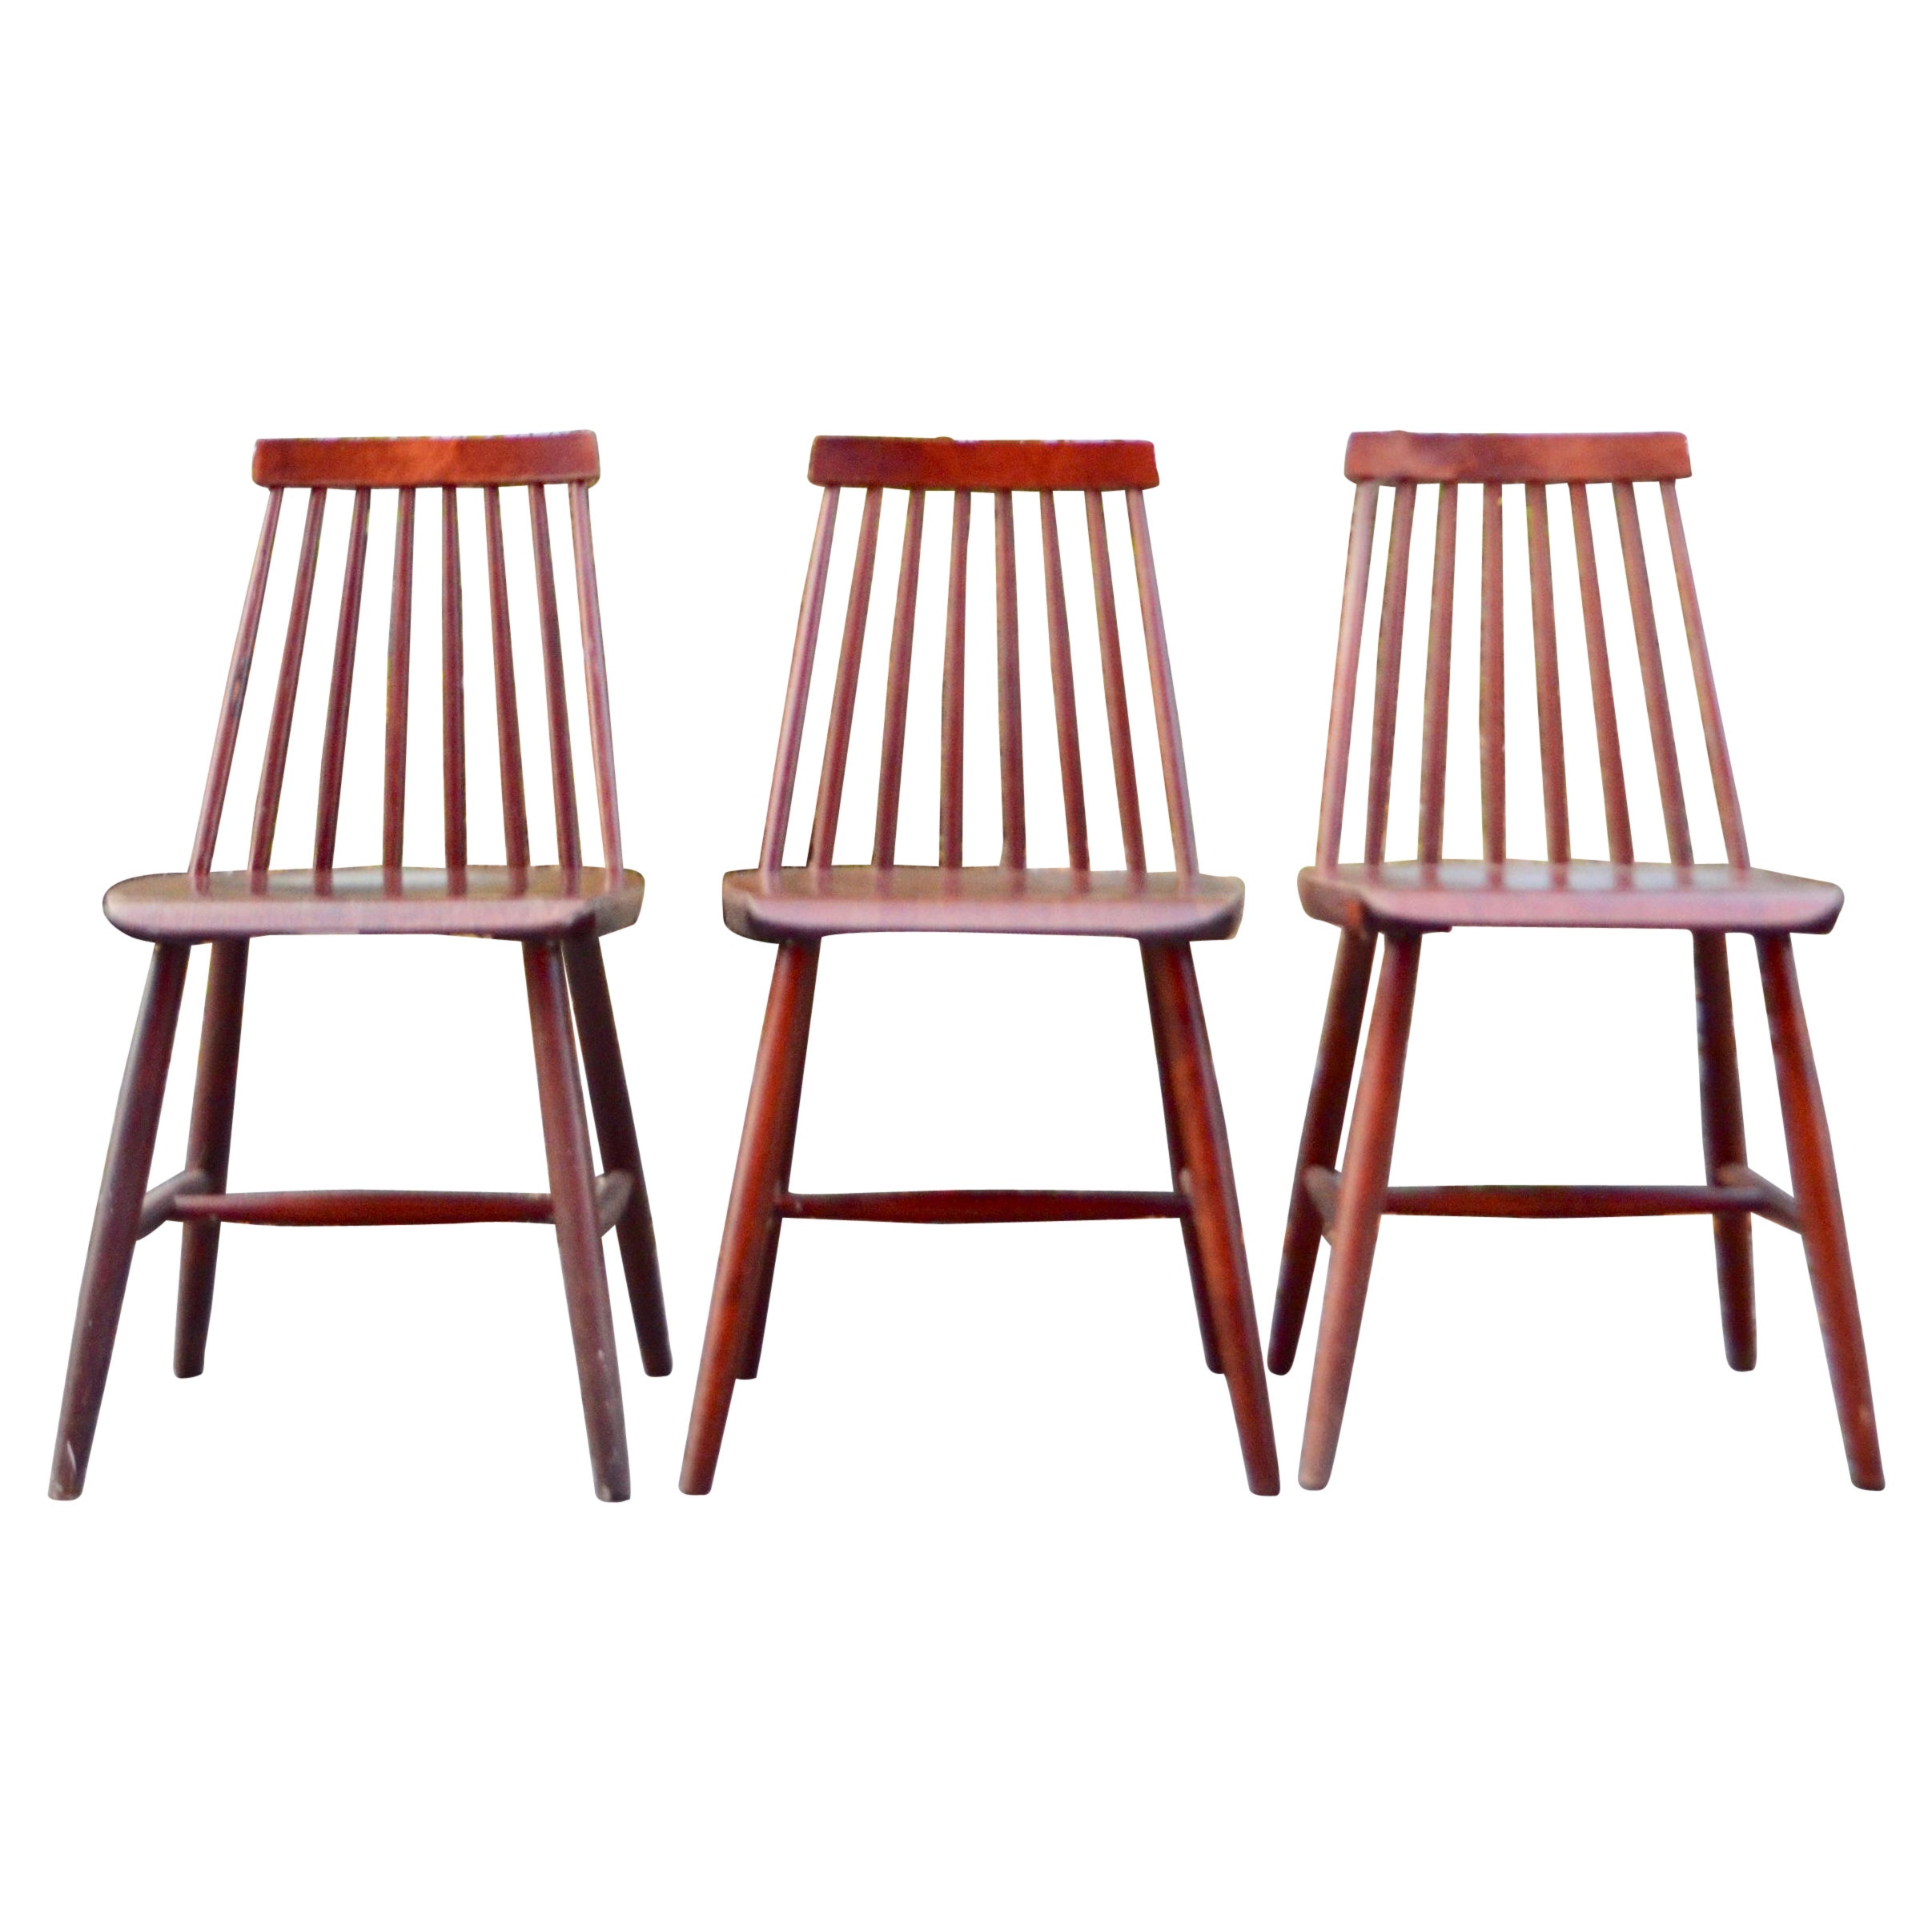 Vintage Ikea 1982 Dining Chair Modell Per Set of 3